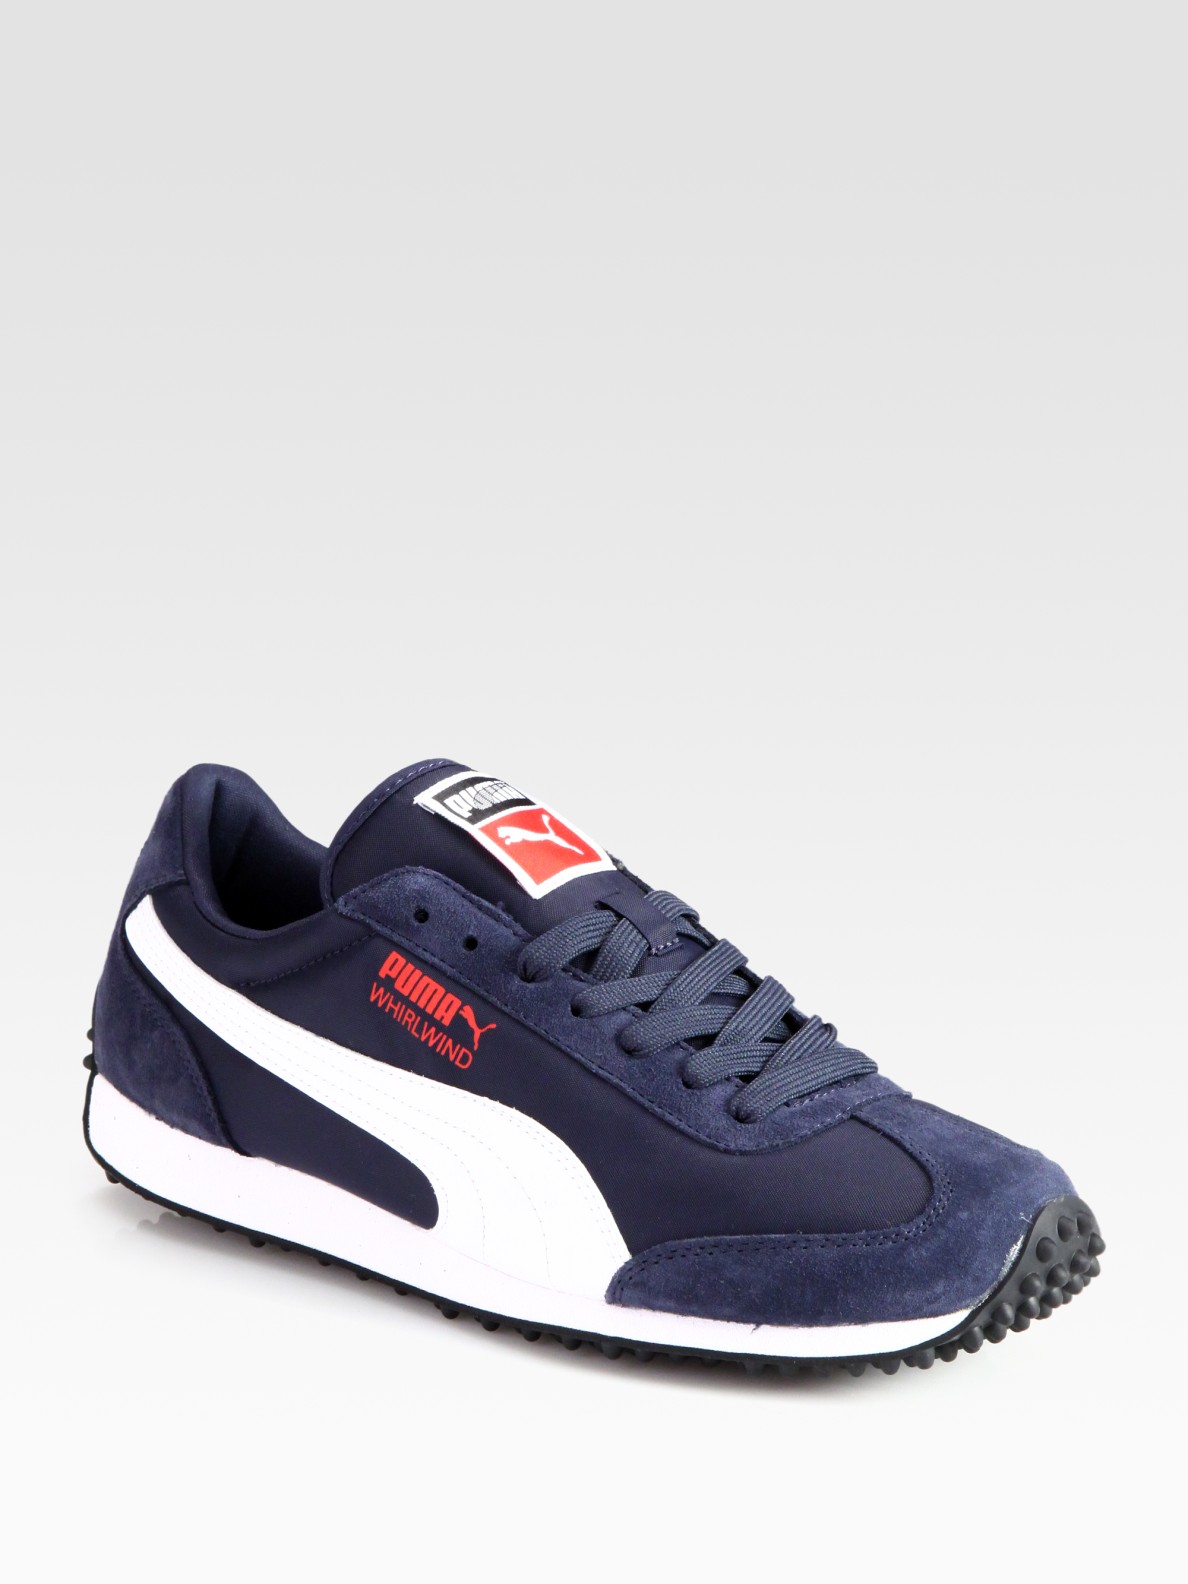 PUMA Whirlwind Classic Sneakers in Navy (Blue) for Men | Lyst